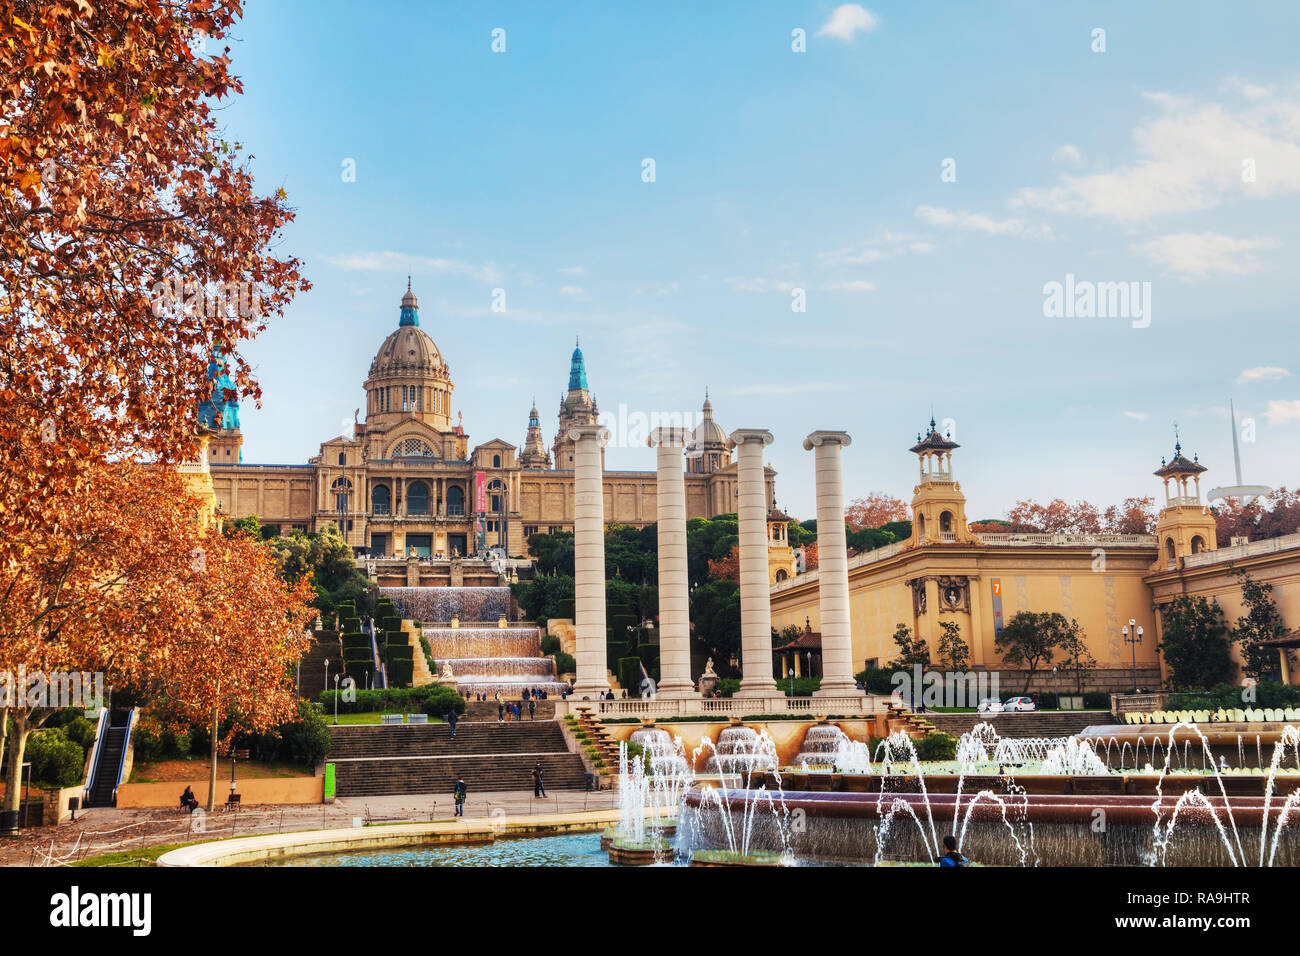 BARCELONA - DECEMBER 14: Montjuic hill with people on a sunny day on December 14, 2018 in Barcelona, Spain. Stock Photo